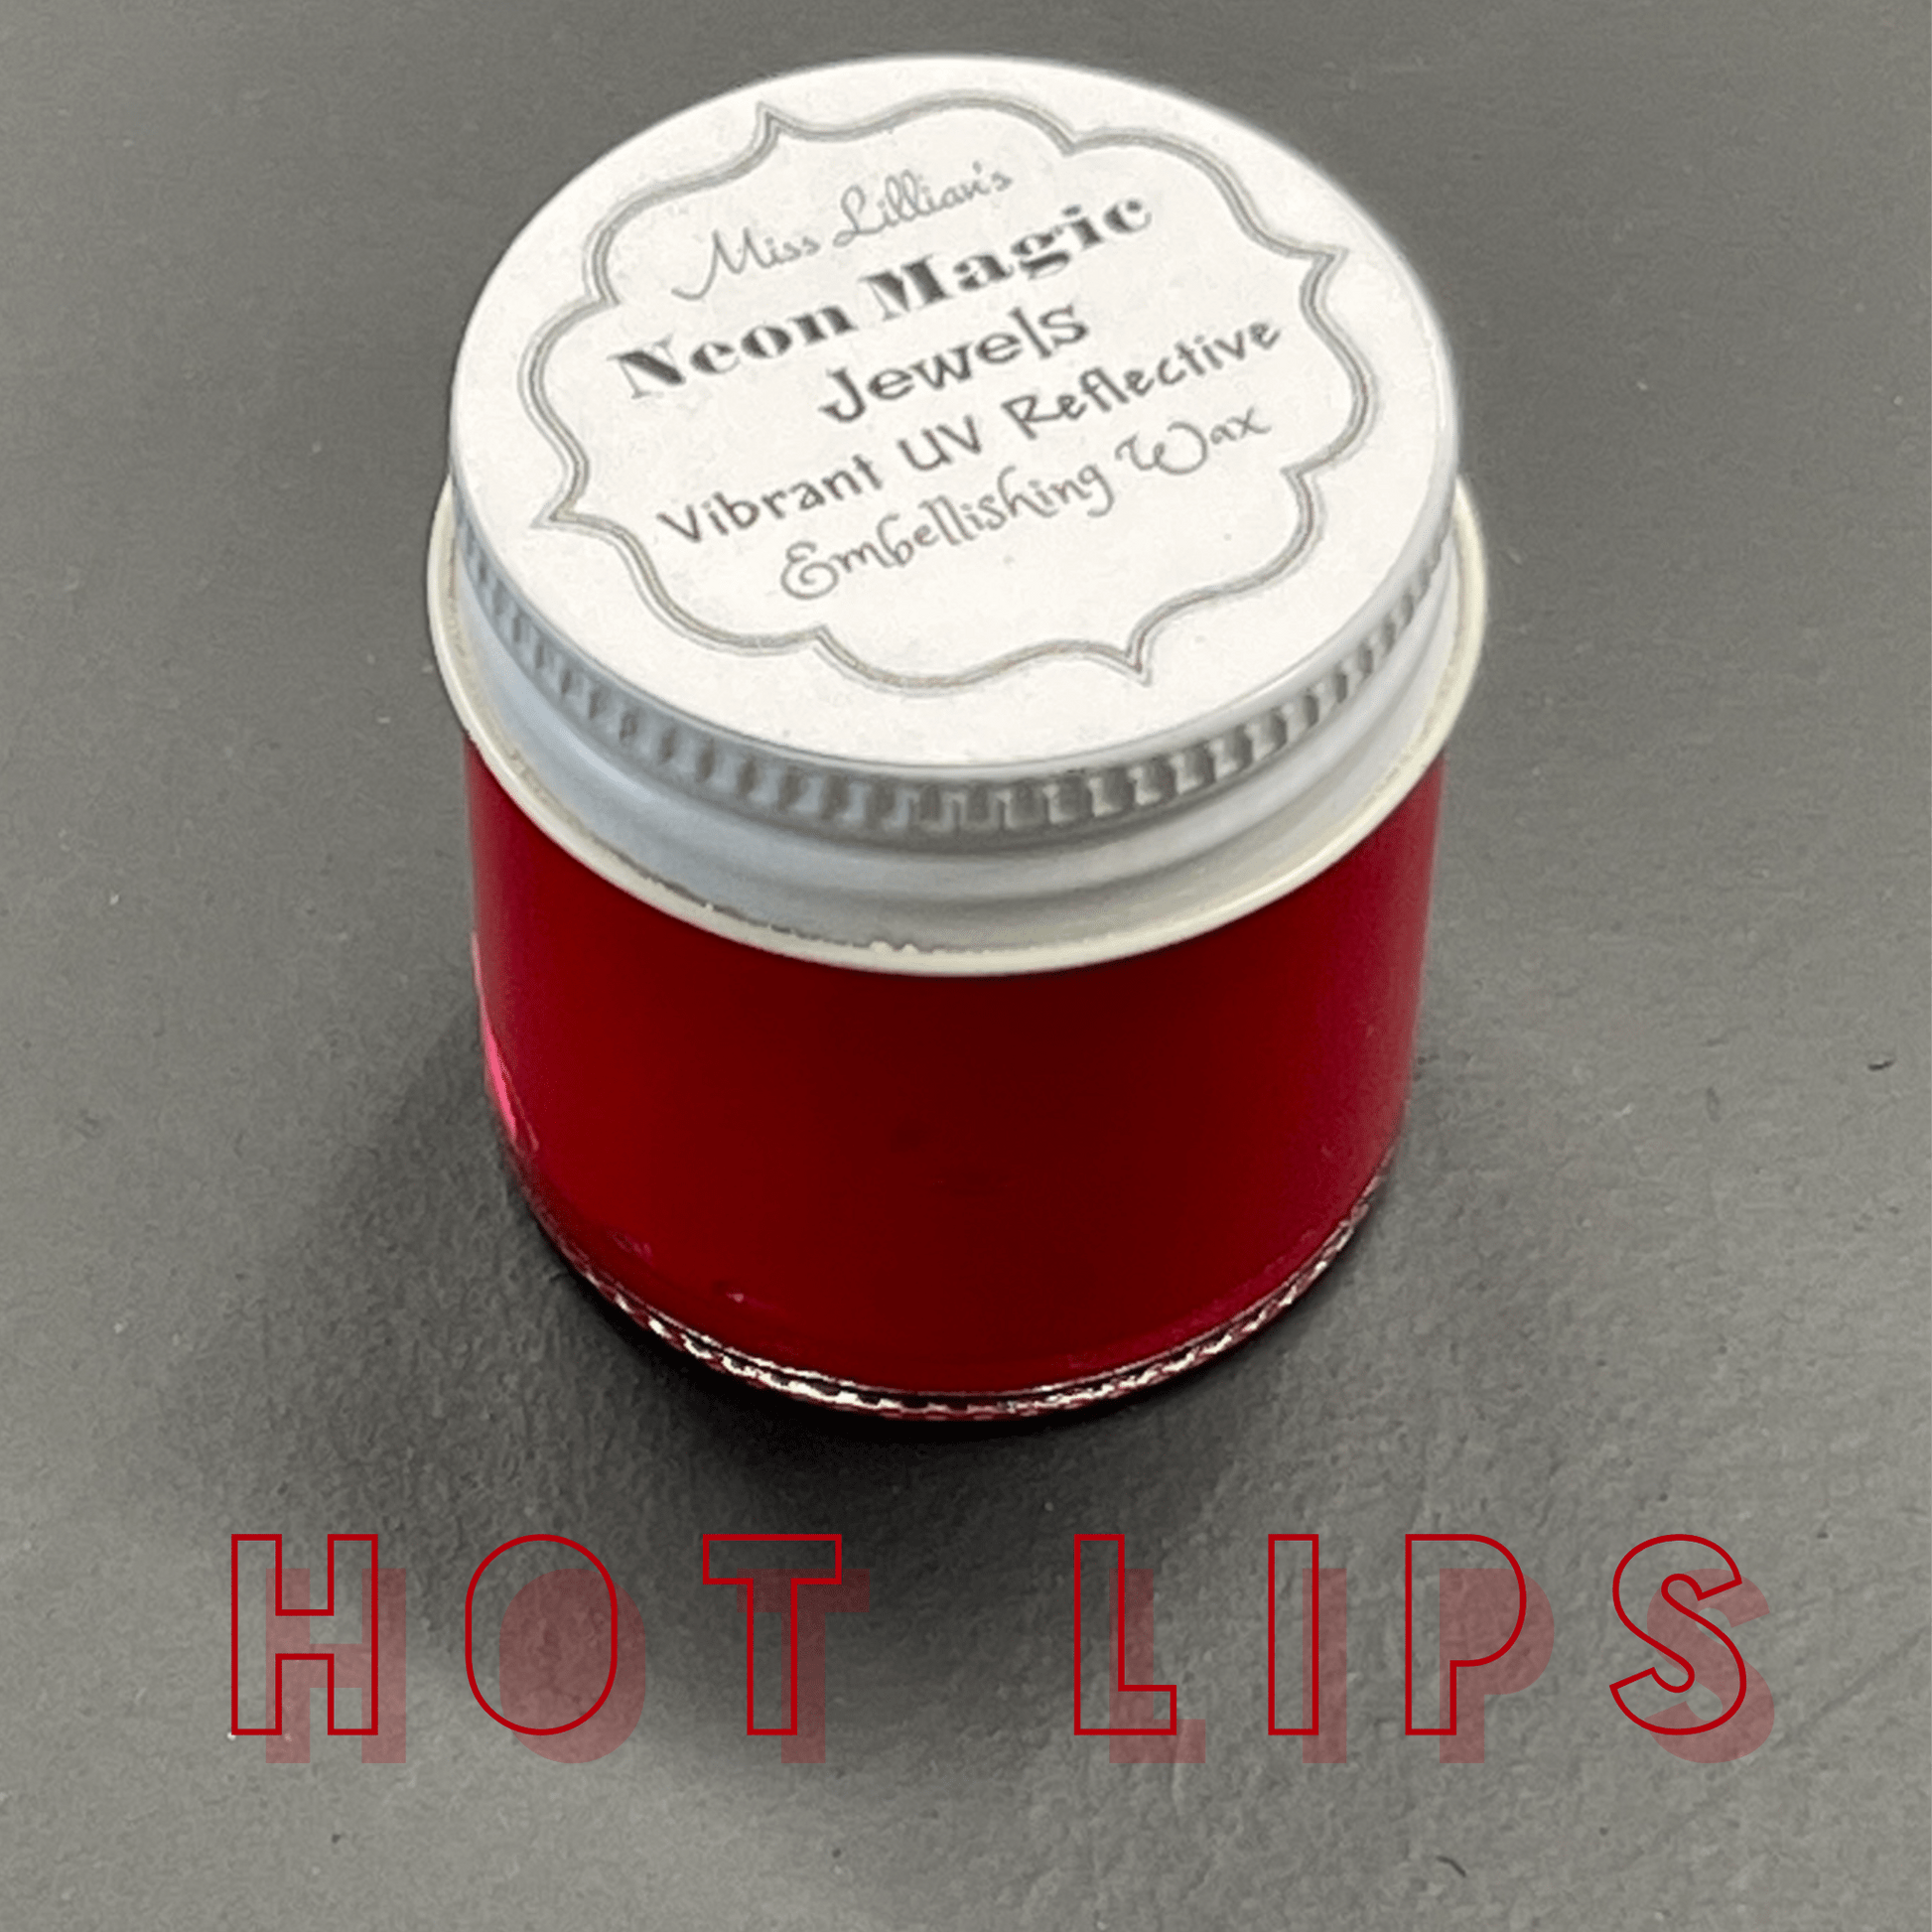 Miss Lillians Chock Paint Neon Waxes HOT LIPS-NEON Gilding Wax Jewels (Bright Red)